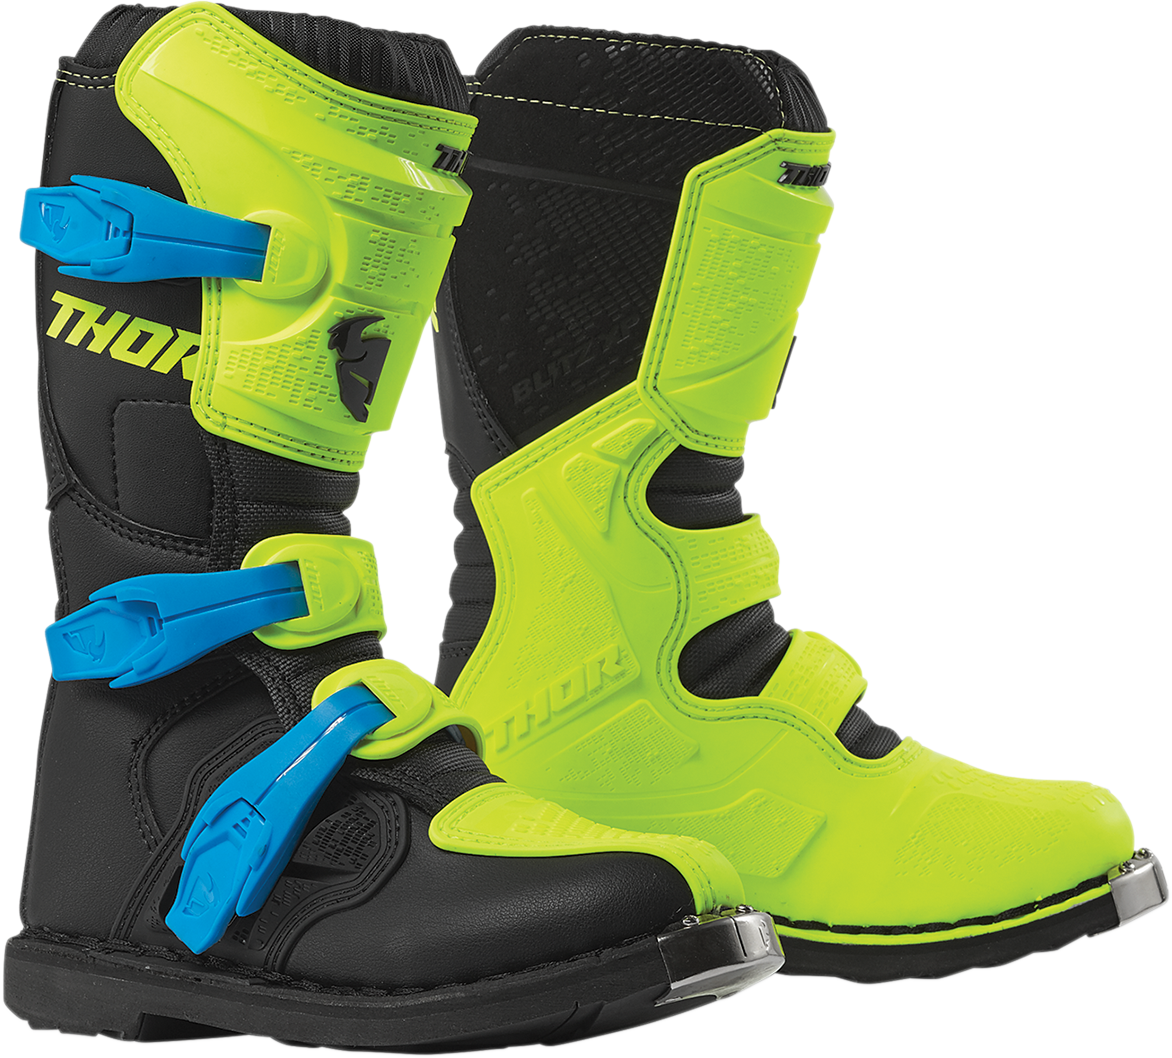 Youth Blitz XP Boots - Green Fluorescent/Black - Size 5